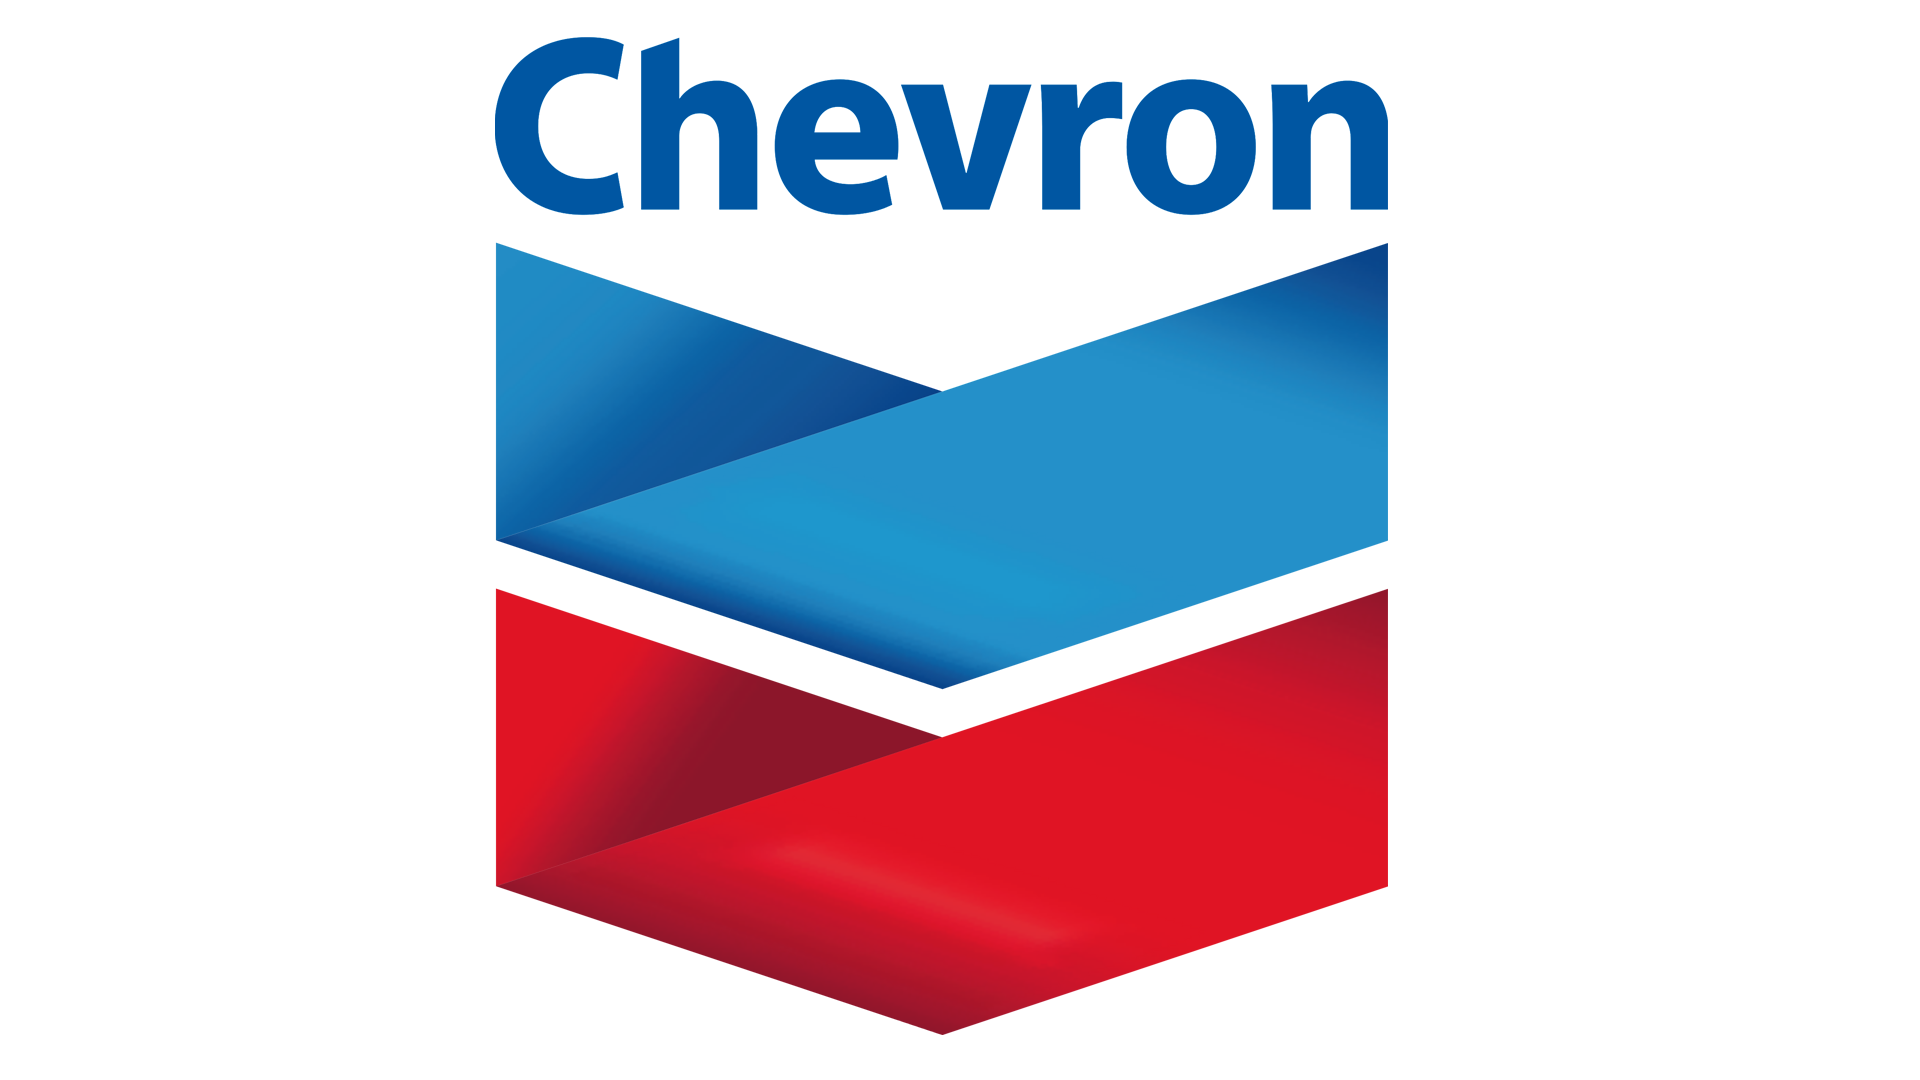 Chevron To Rally Around 21%? Here Are 5 Other Price Target Changes For Monday